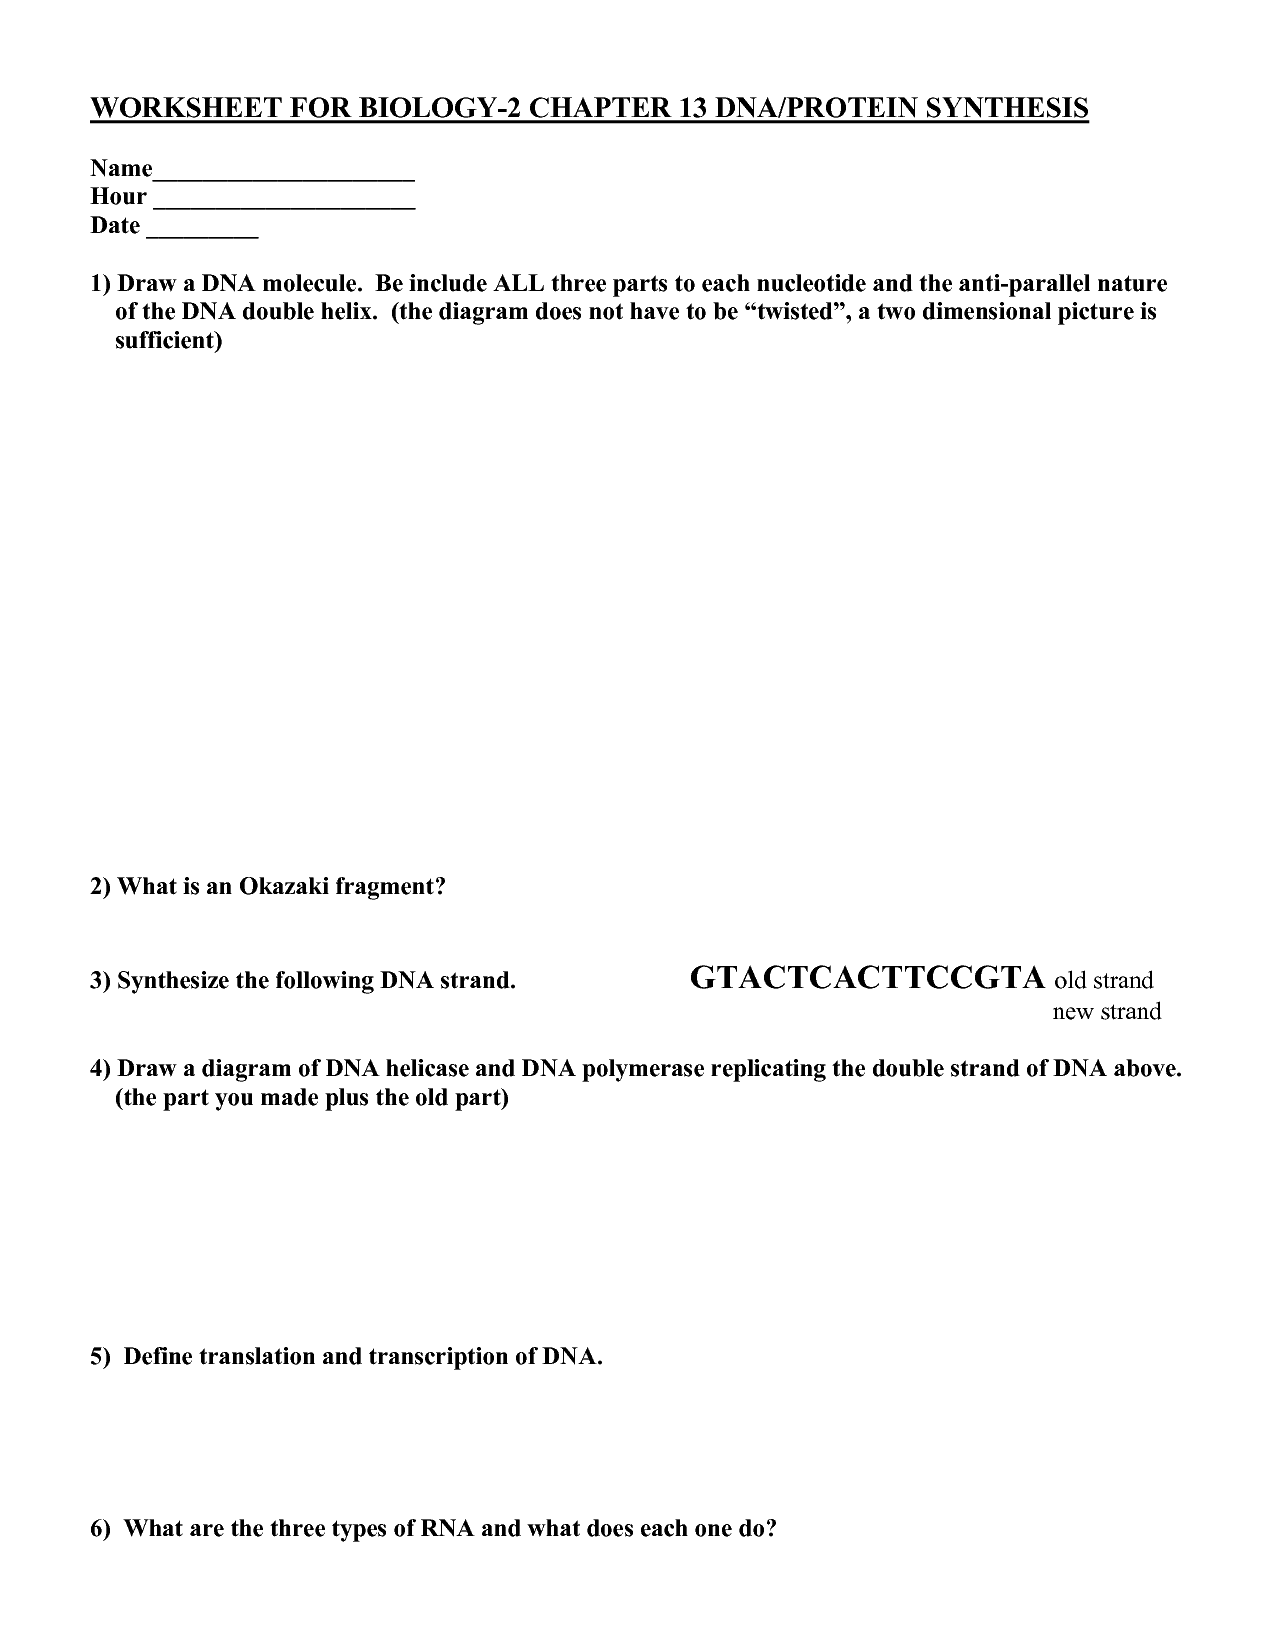 DNA RNA Protein Synthesis Worksheet Answers Image